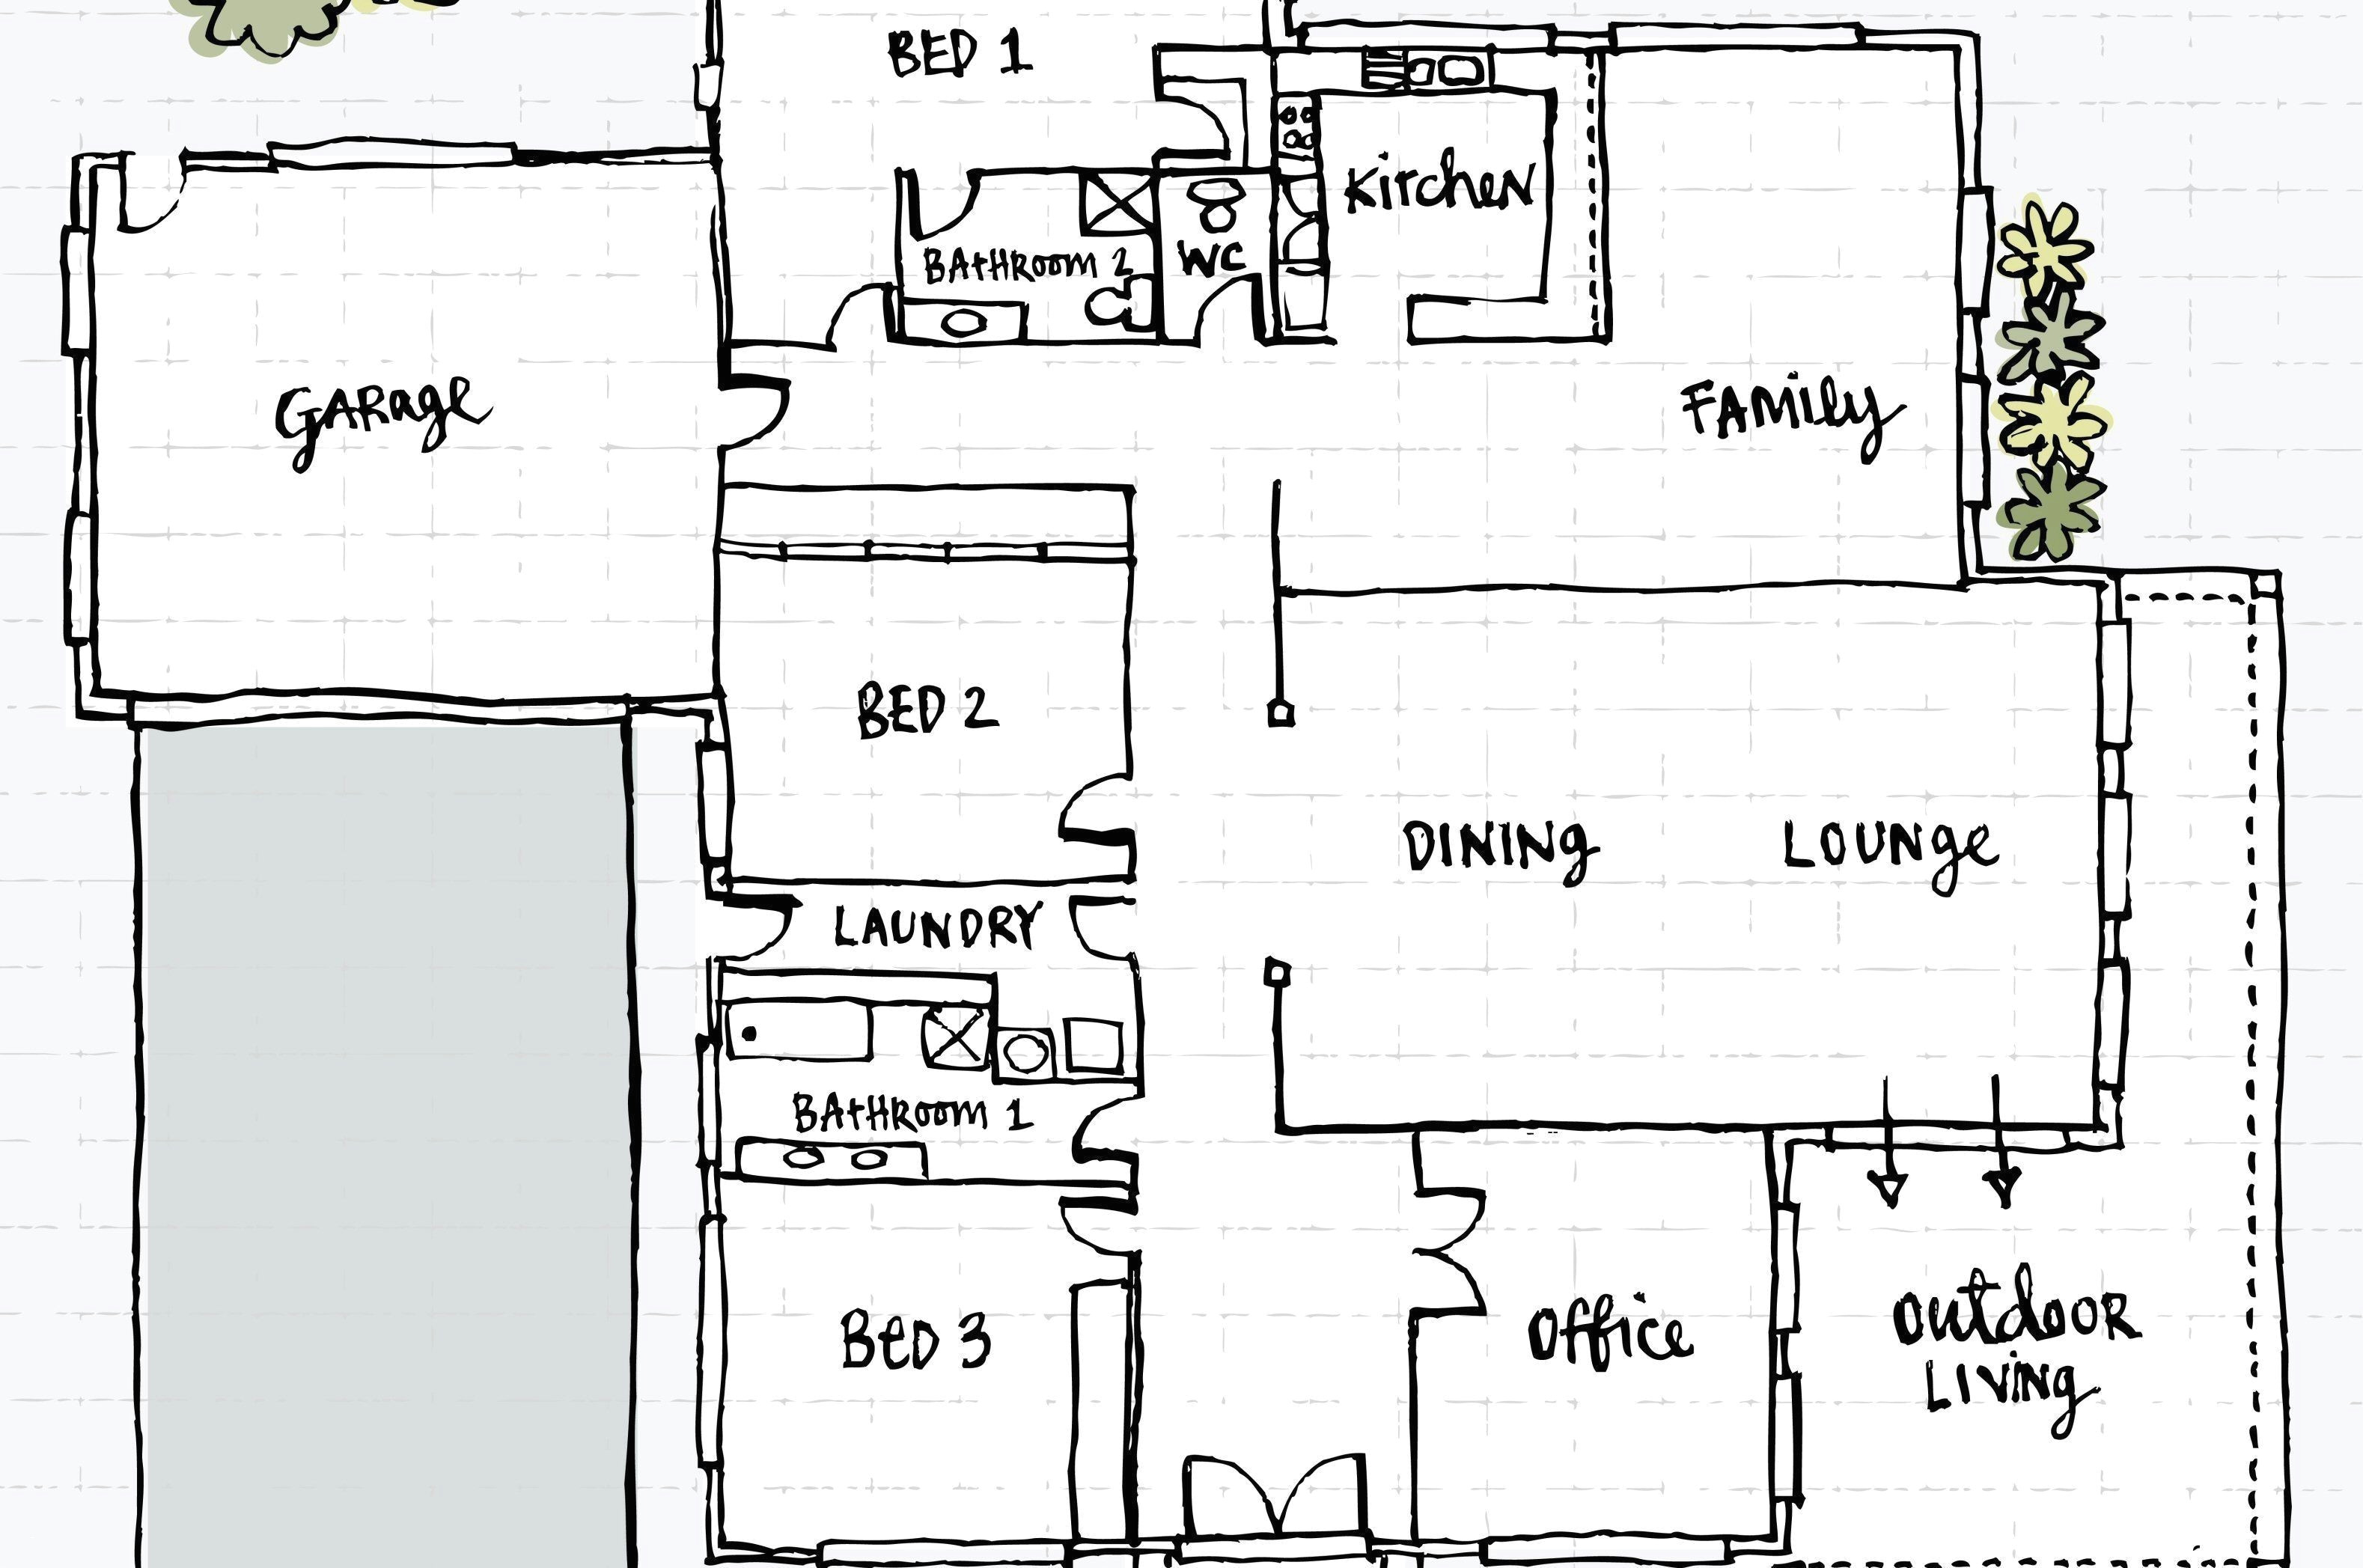 Drawing Up A Will 37 Stylish Drawing A Floor Plan Pattern Floor Plan Design